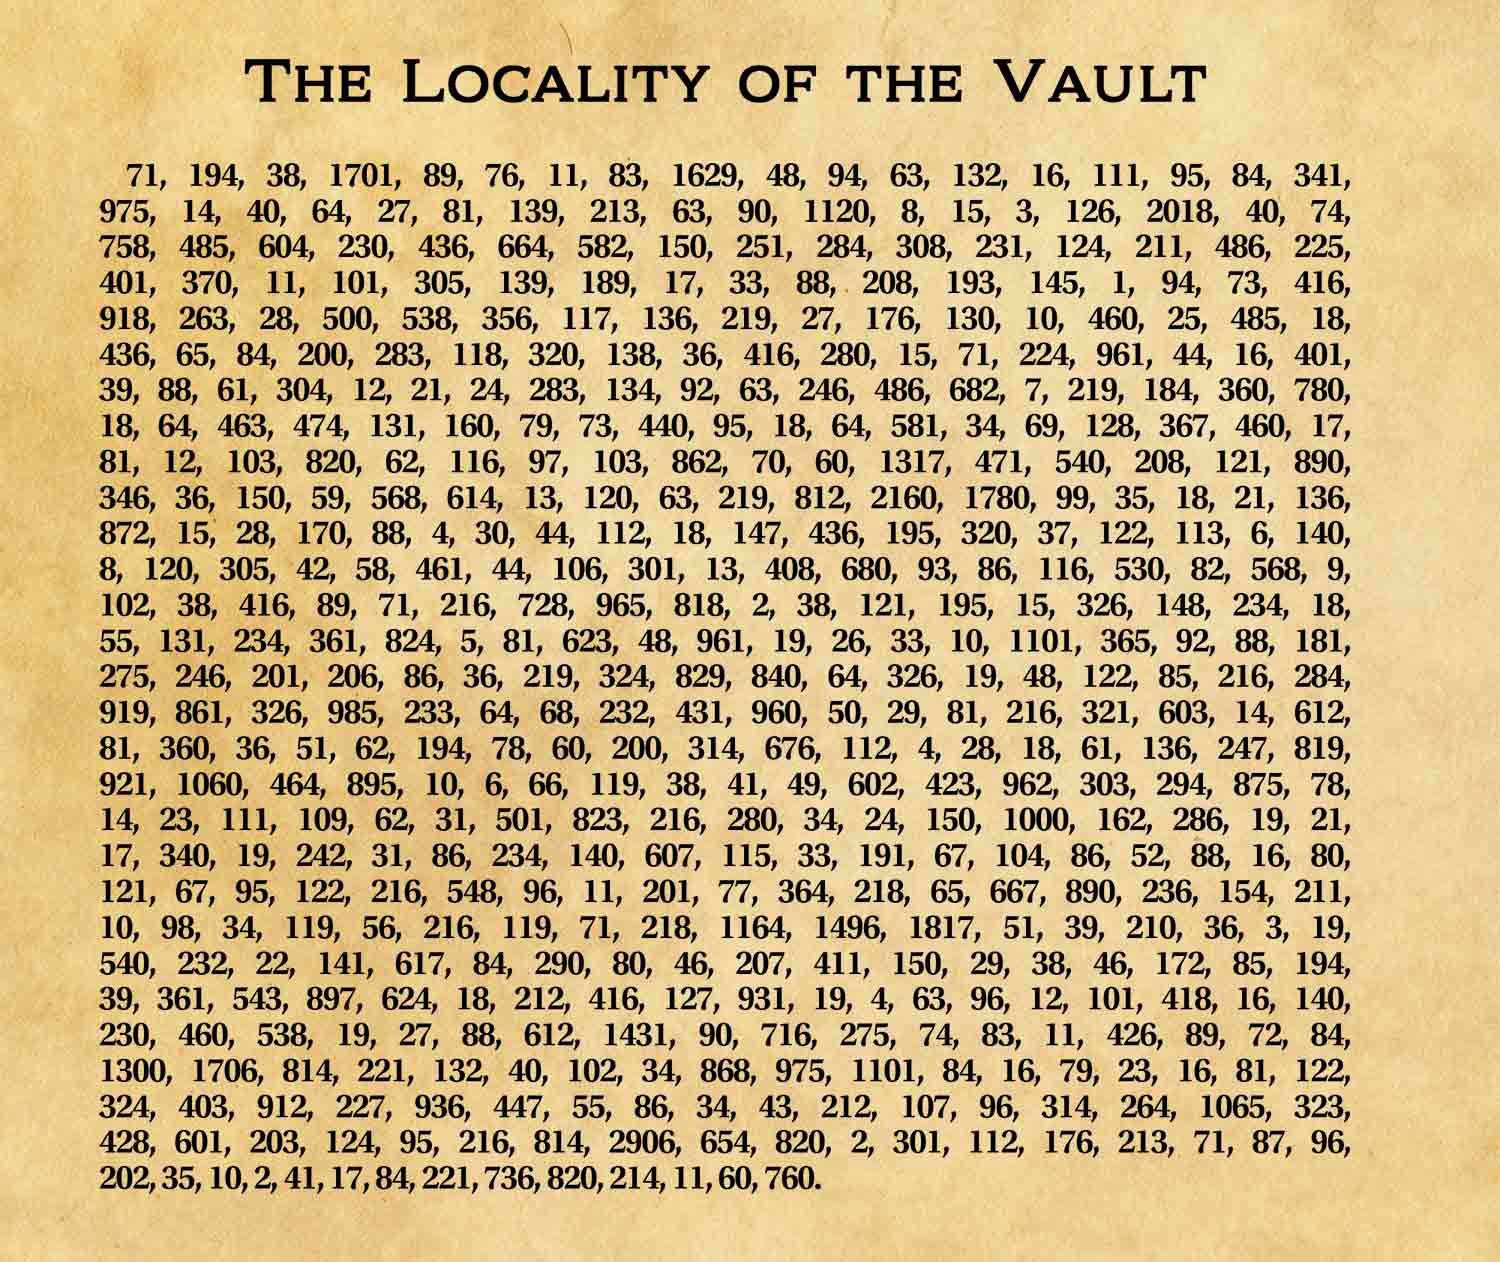 A long list of numbers separated by commas under the title The Locality of the Vault on a yellowed background.